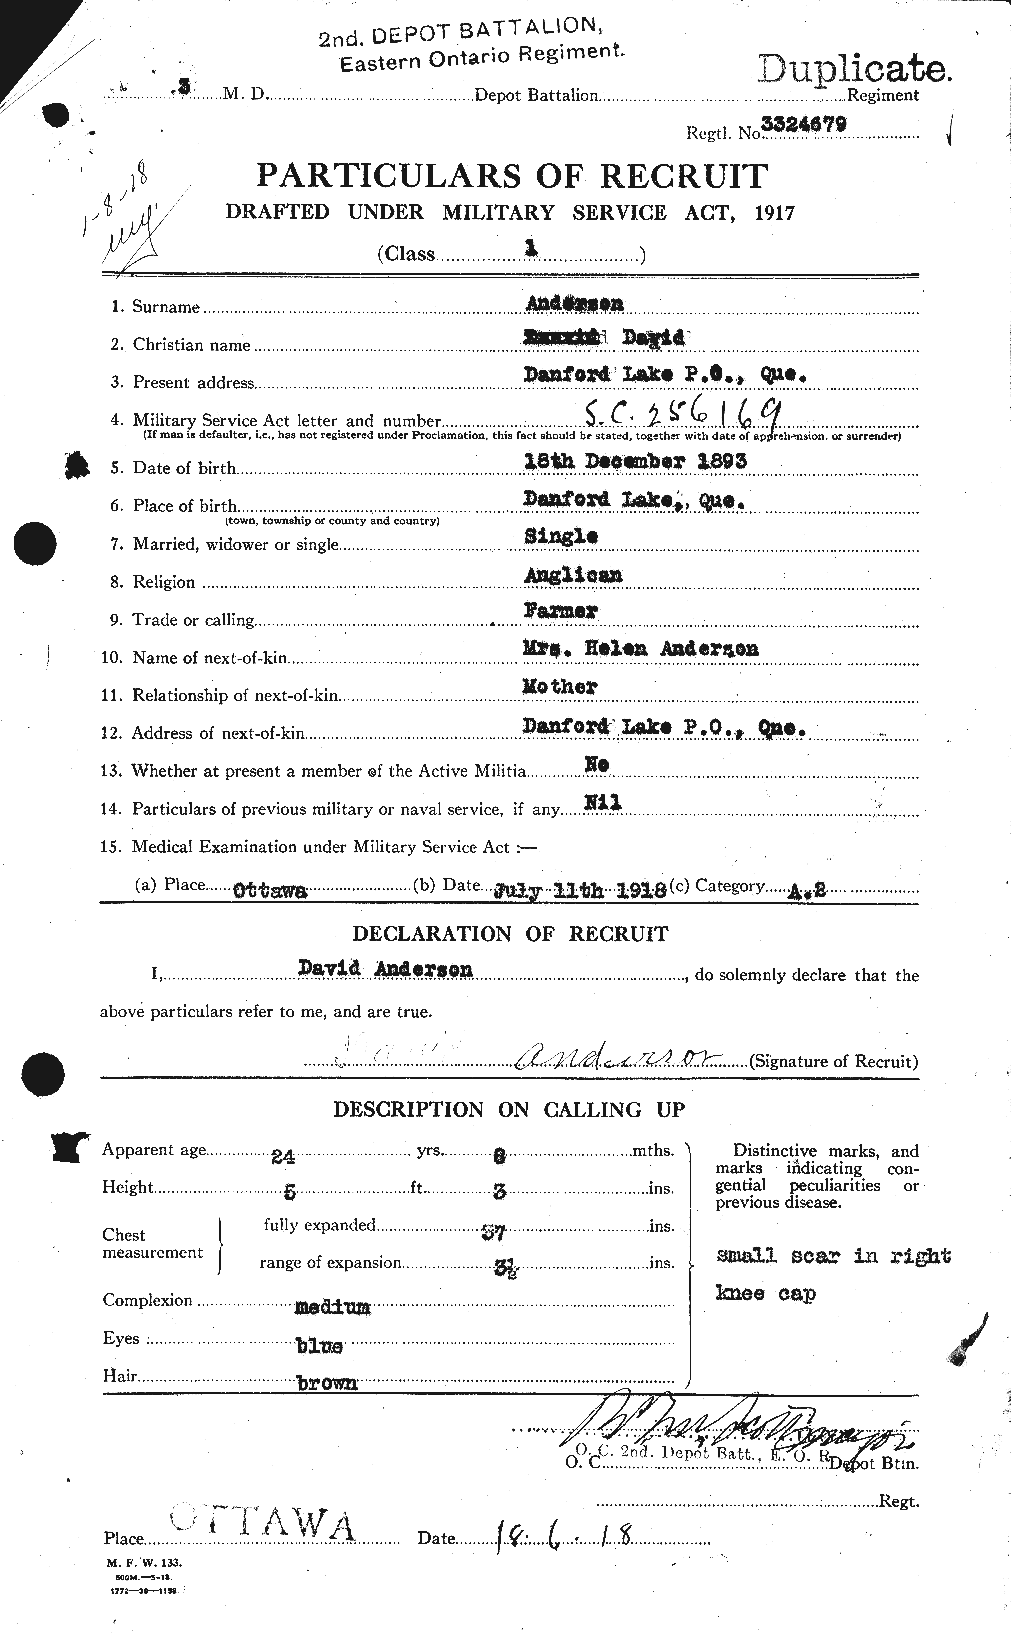 Personnel Records of the First World War - CEF 210019a